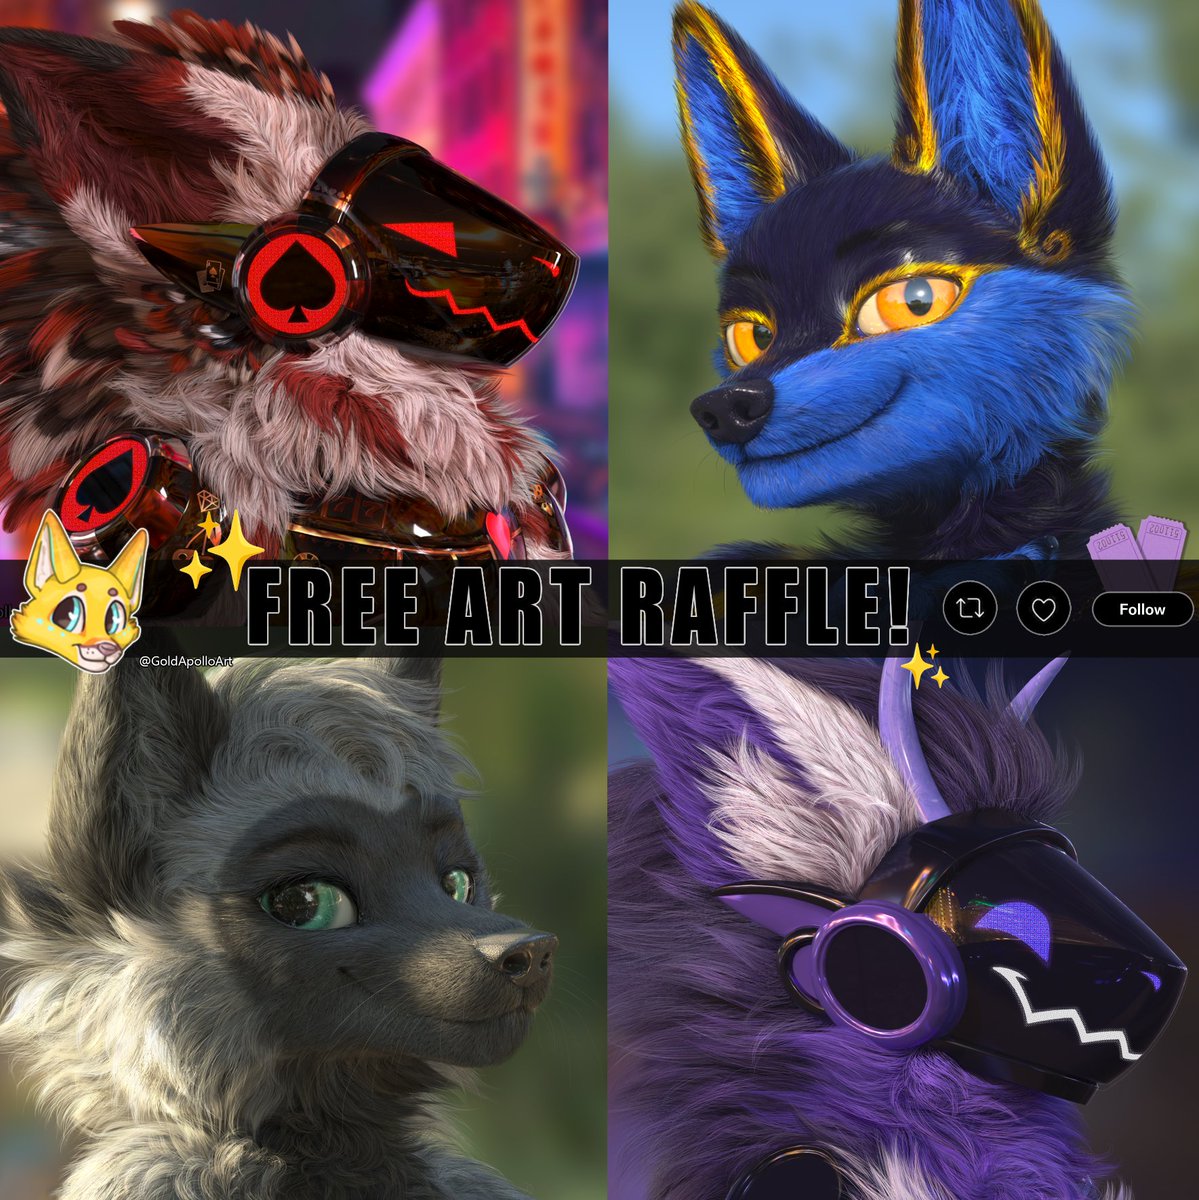 ‼️ART RAFFLE TIME‼️
Lets celebrate the changing seasons! 🌸(and my fixed computer)
Prize -> Illustrated headshot🎉
💚 All species welcome! 
💚Like and RT this post 
💛[Optional] Comment your OC! 
Ends May 14th